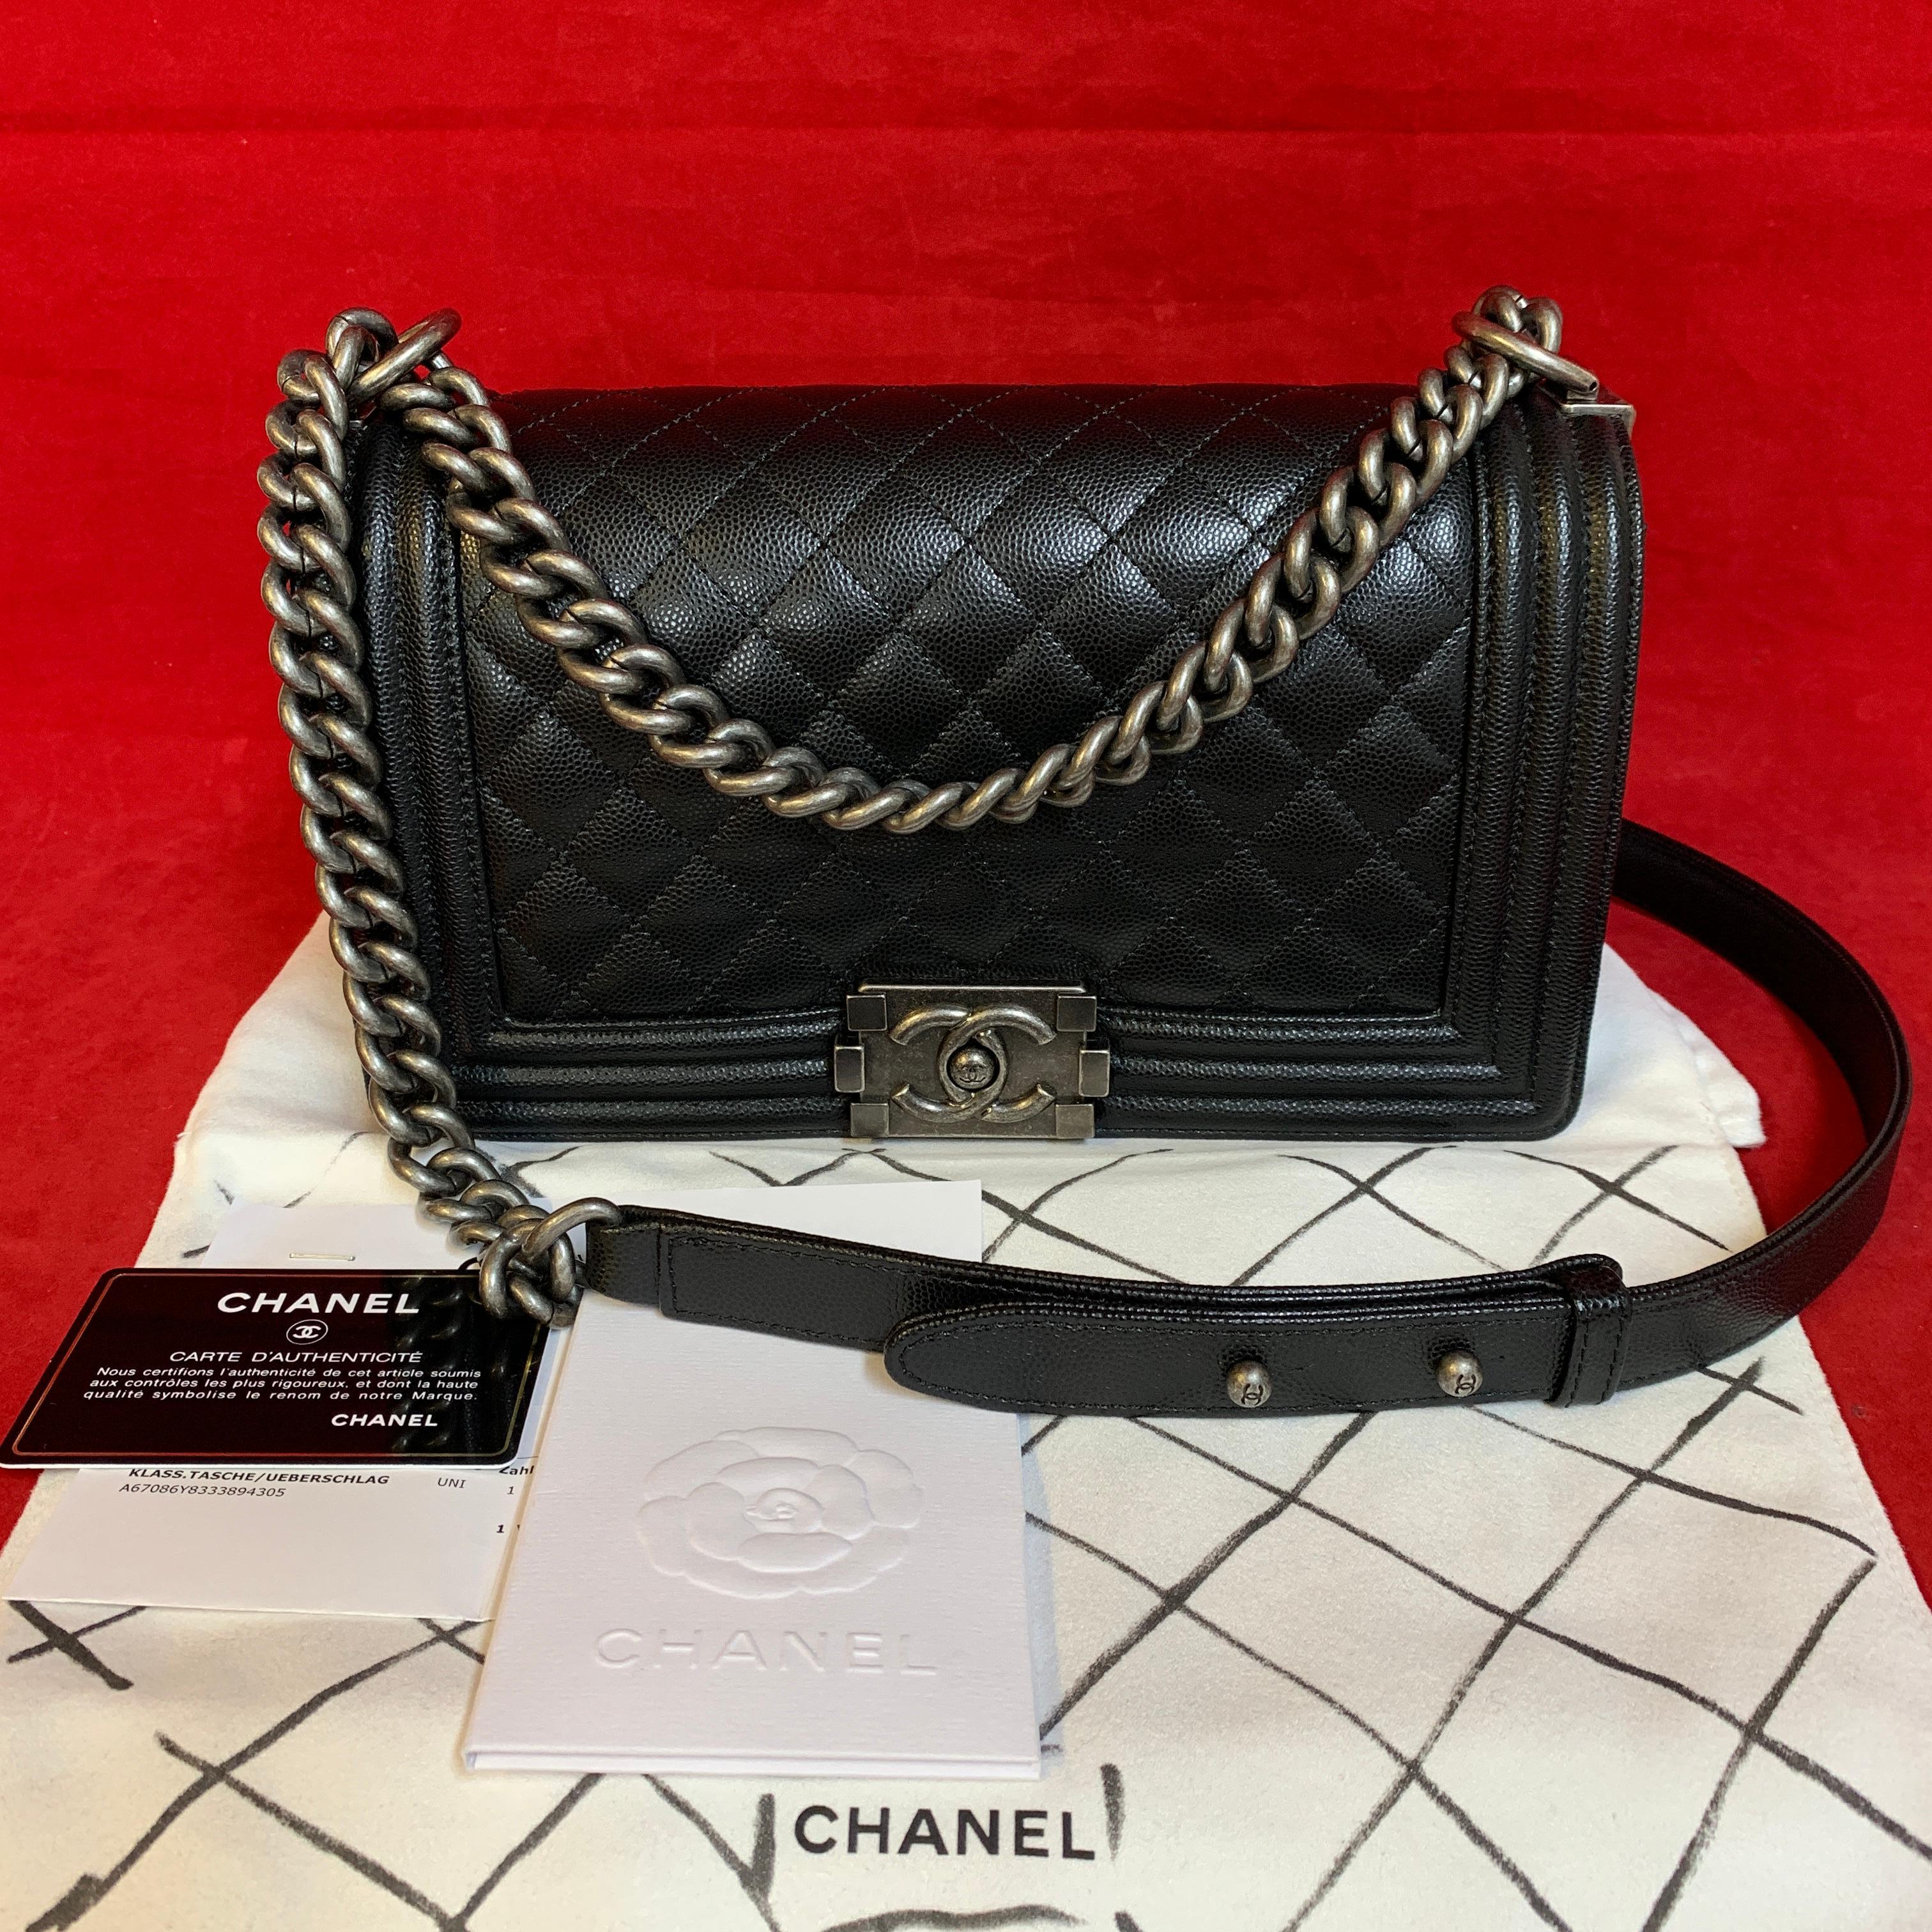 CHANEL Boy Medium Shoulder Bag made of black quilted caviar.

The bag is in a very good condition and has no signs of use.

The delivery includes:
- Chanel Boy Medium caviar
- Dustbag
- Original CHANEL bill of 2018
- warranty card

Dimensions:
9.8 x